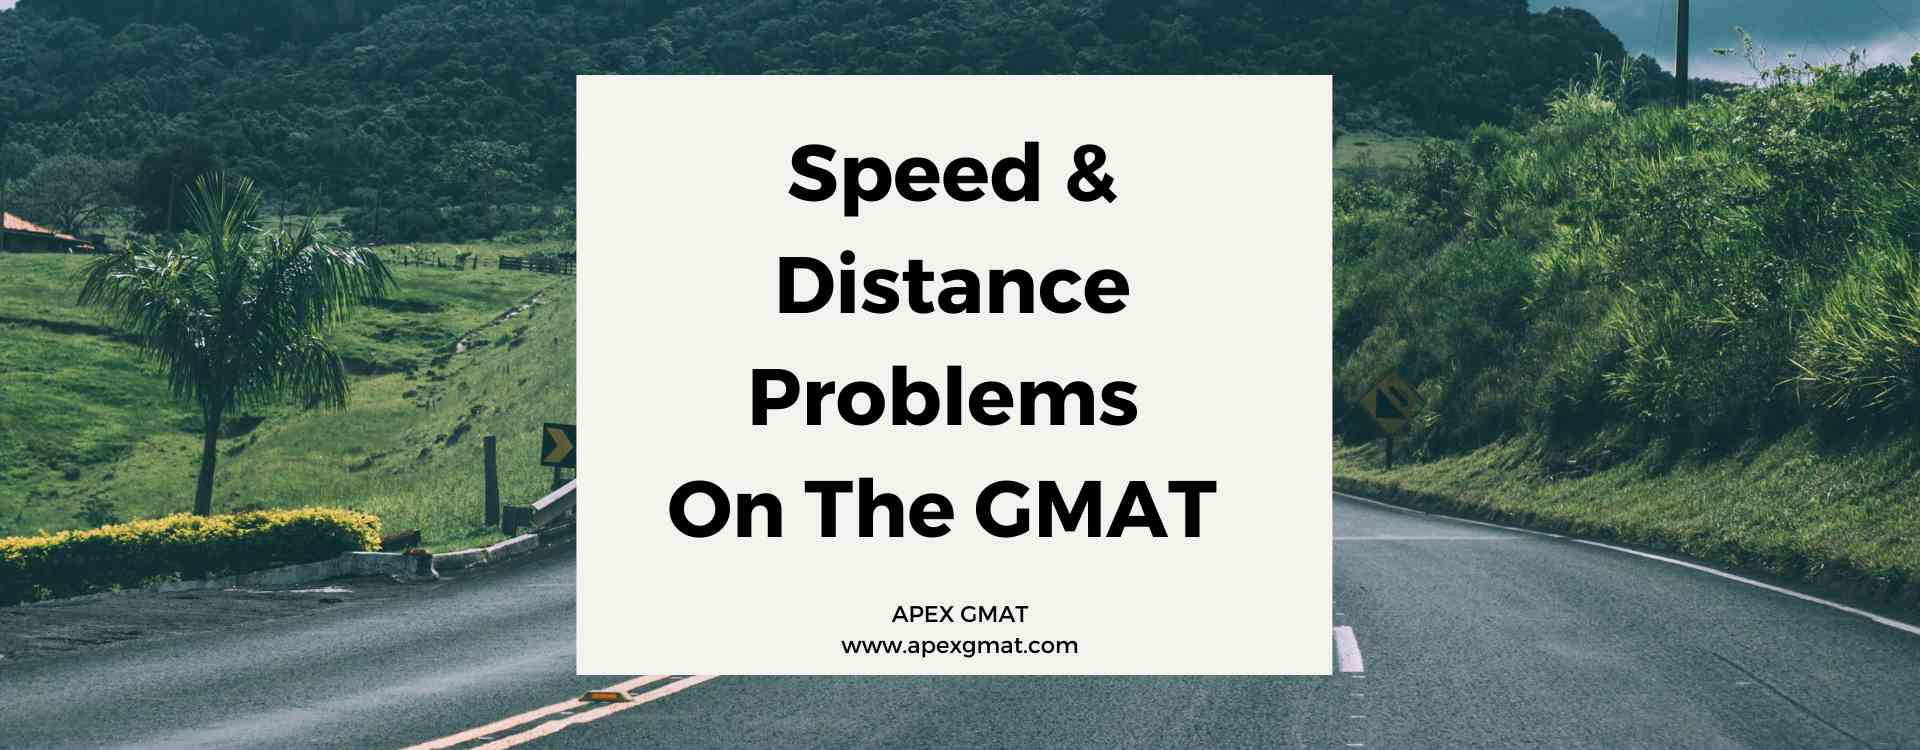 Speed And Distance Problems On The GMAT